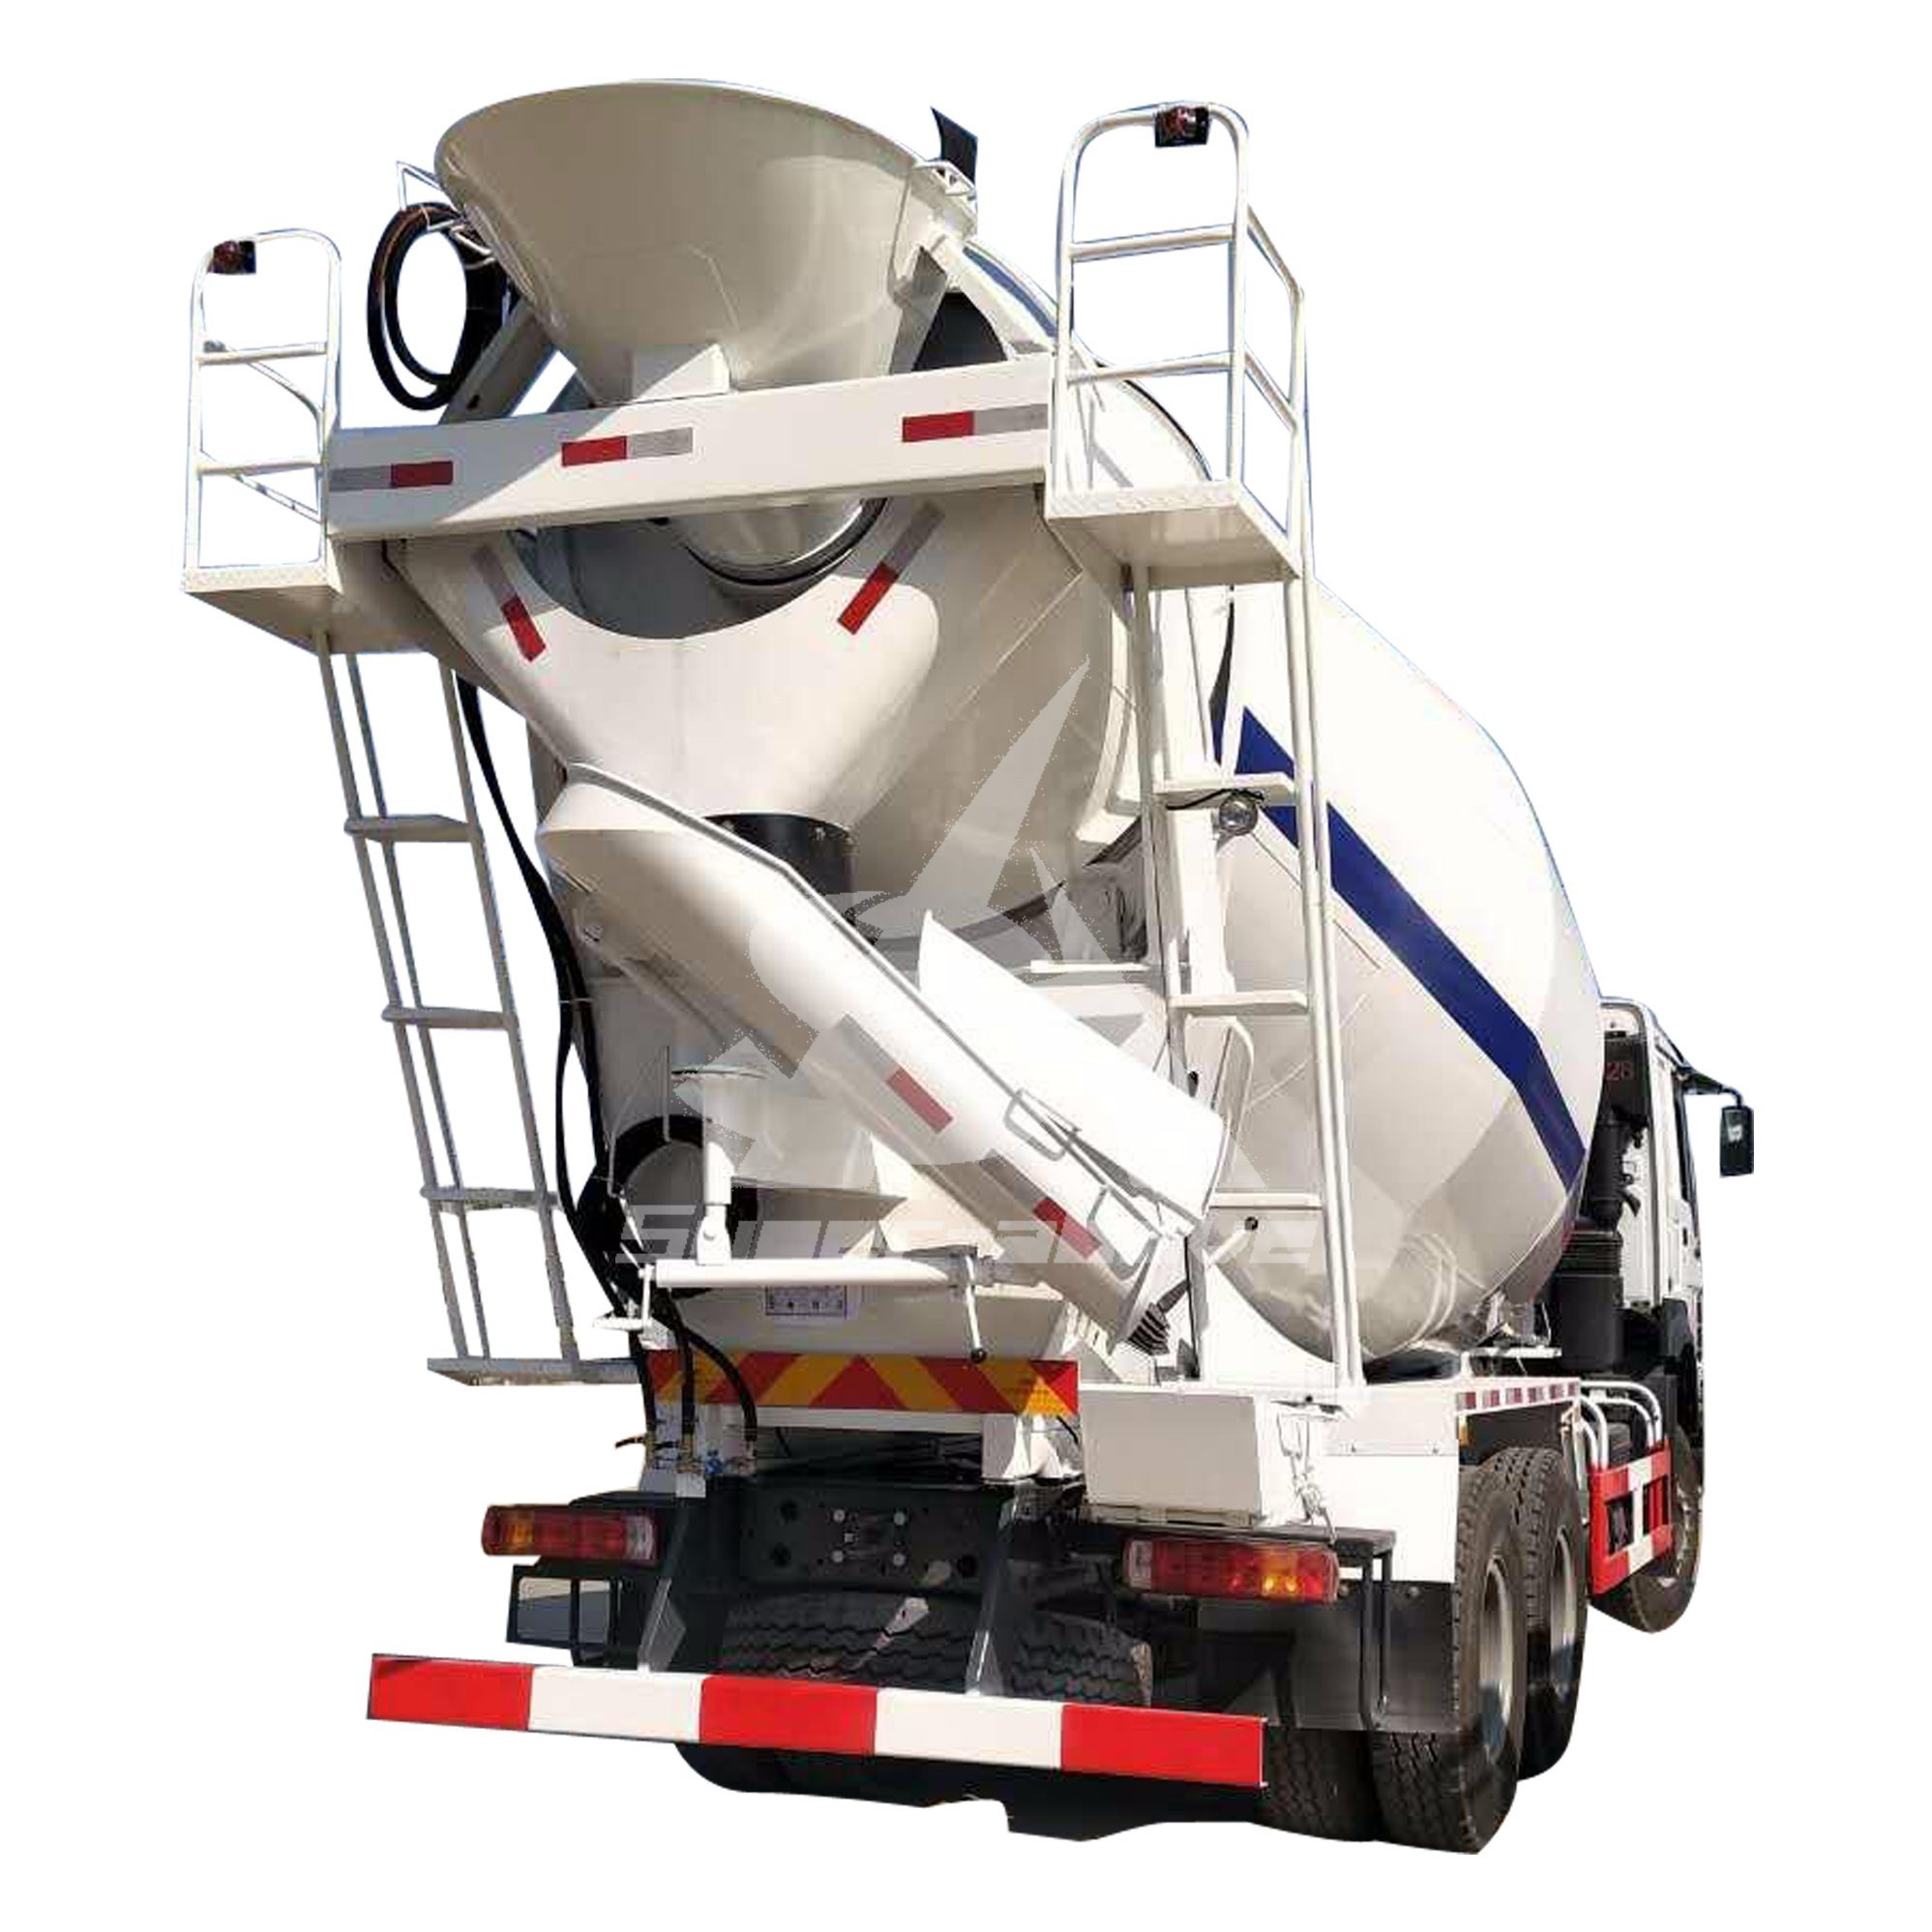 Sinotruck HOWO 10 Cubic Meter Cement 10m3 Concrete Mixer Truck for Sale